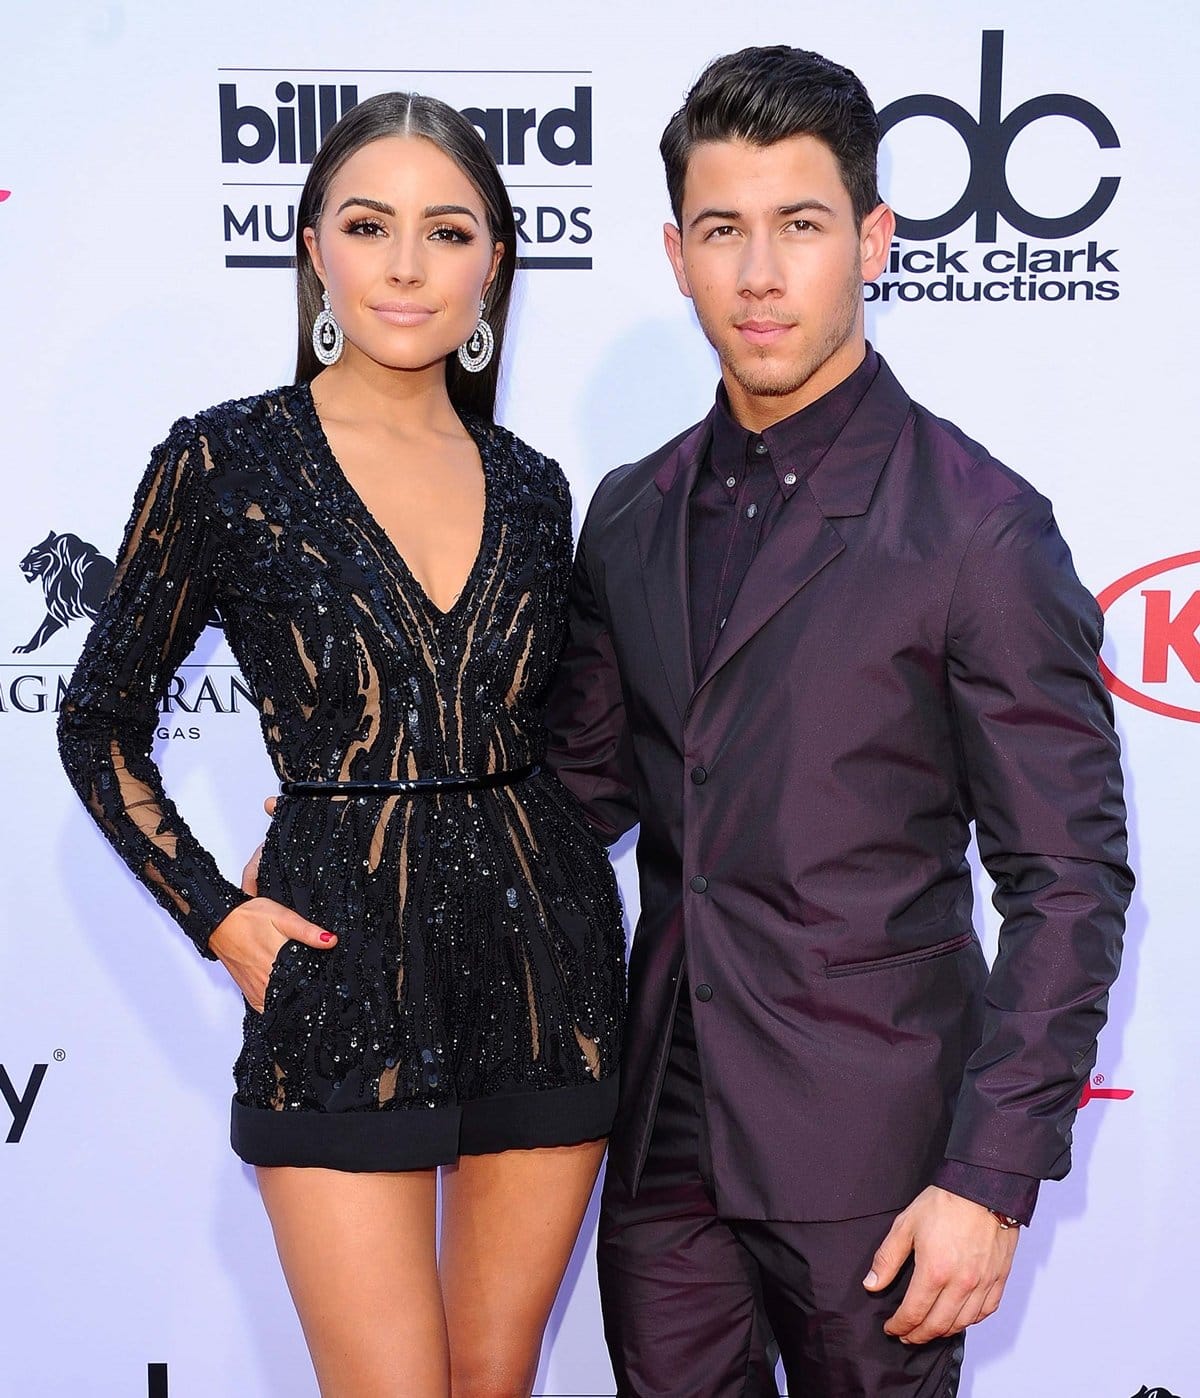 Nick Jonas and Olivia Culpo met when he hosted Miss USA in 2013 and dated for two years